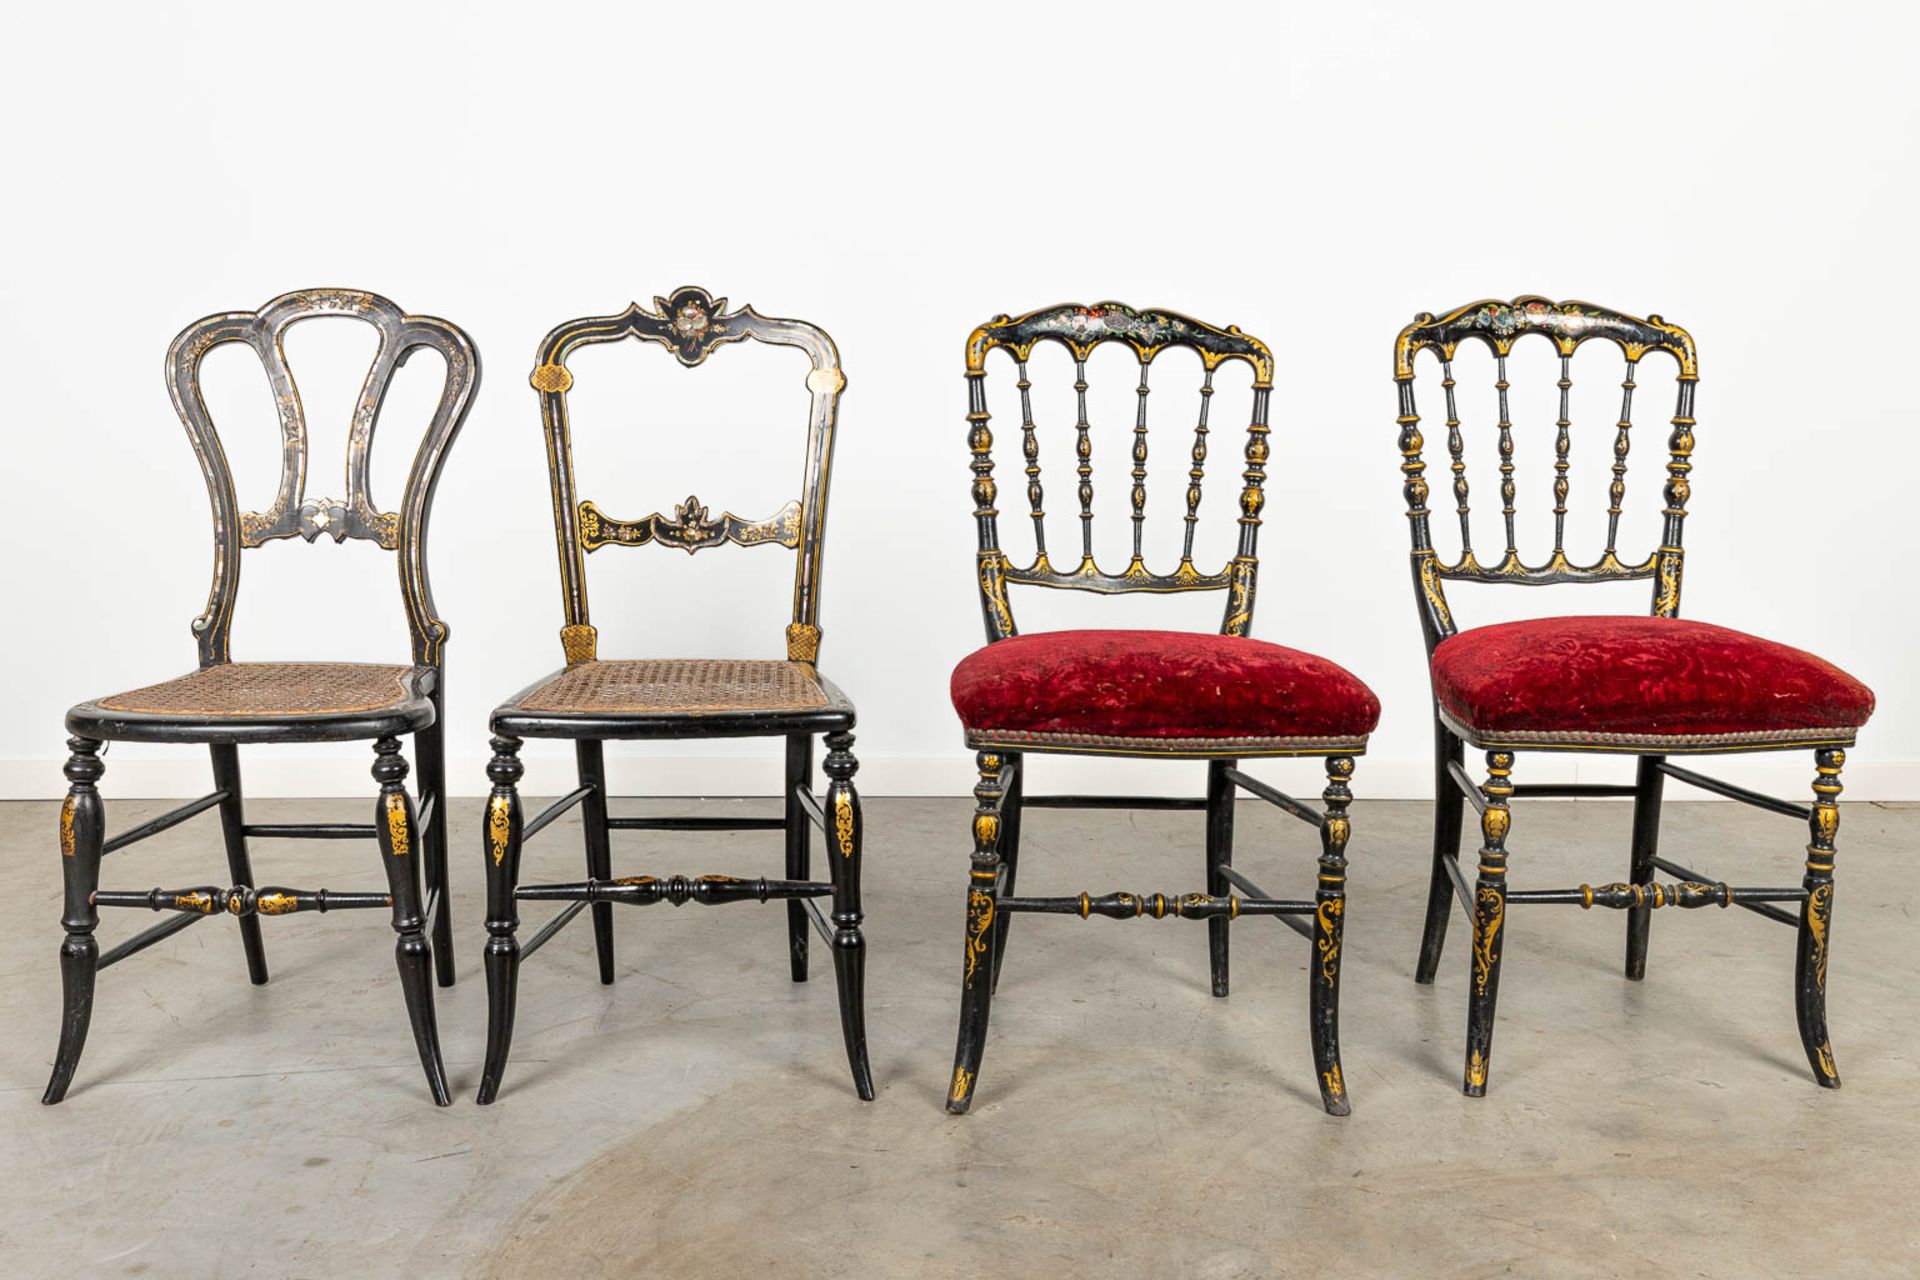 A collection of 3 chairs inlaid with mother of pearl and hand-painted decors. - Image 6 of 10